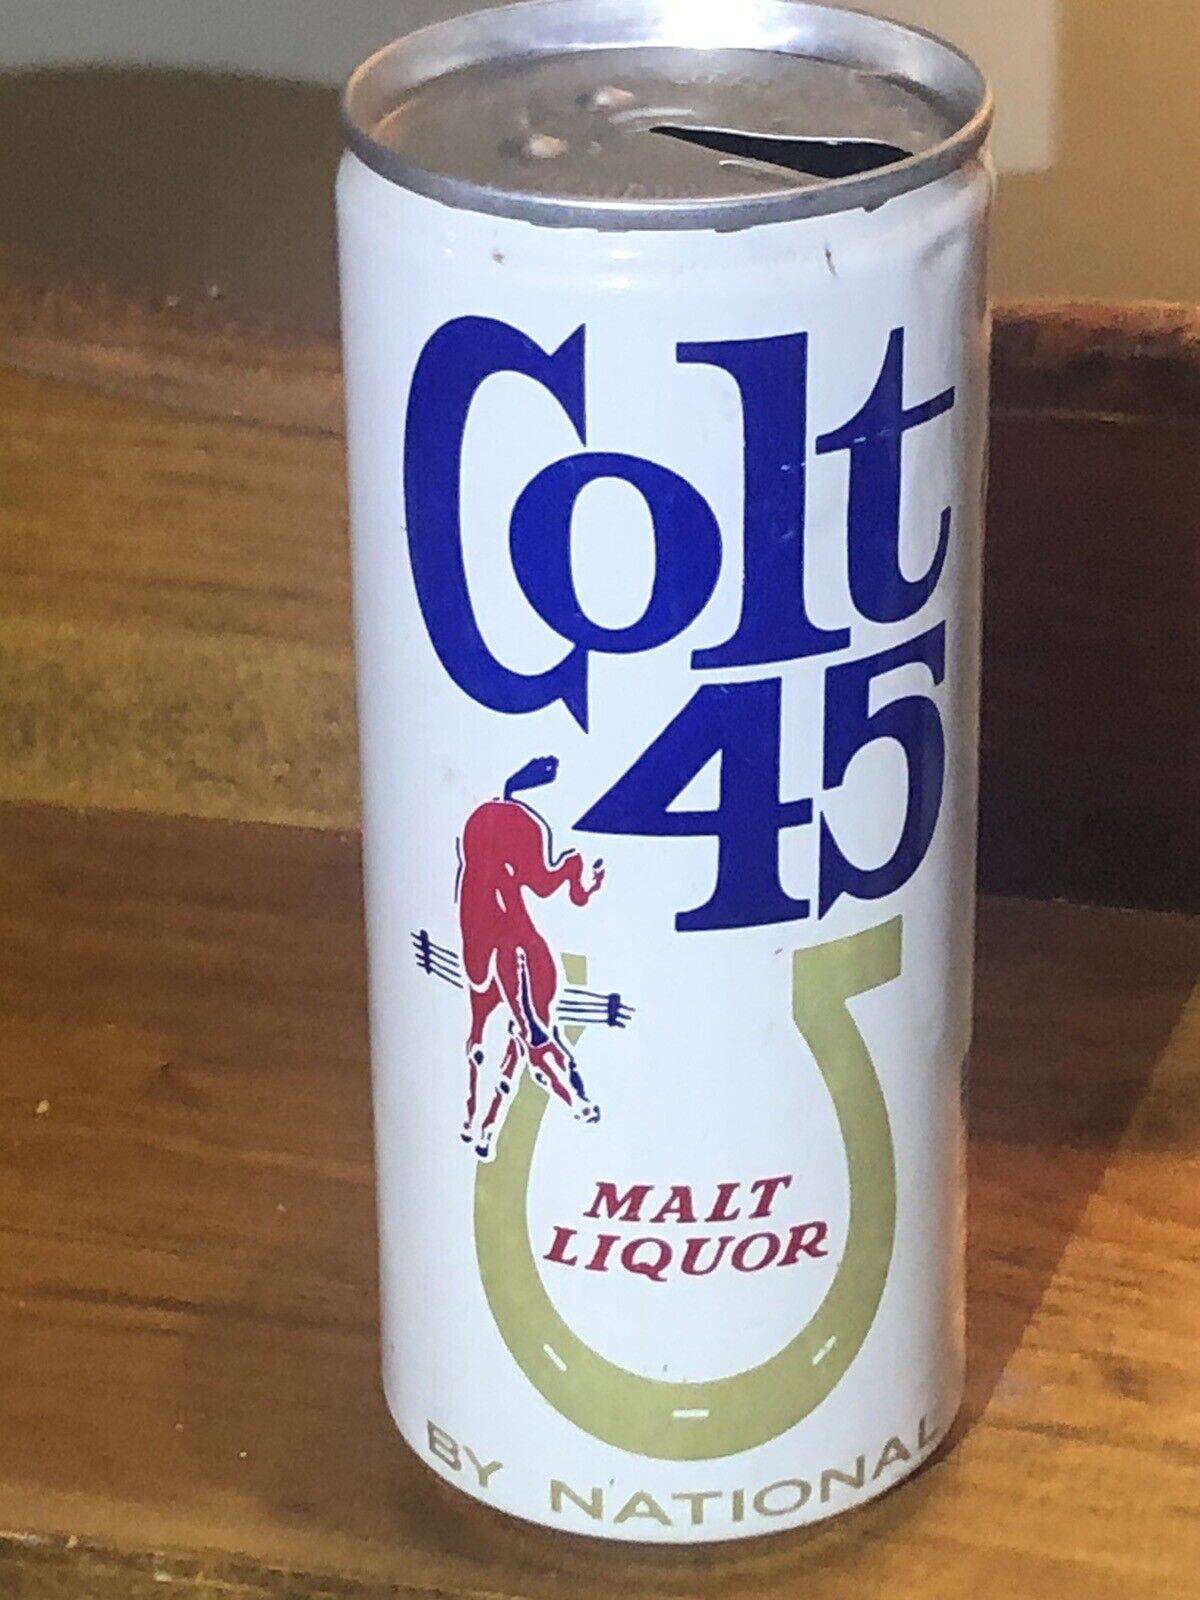 16oz Colt 45 Zip Top Beer Can Baltimore,Maryland Malt Liquor By National Brewing